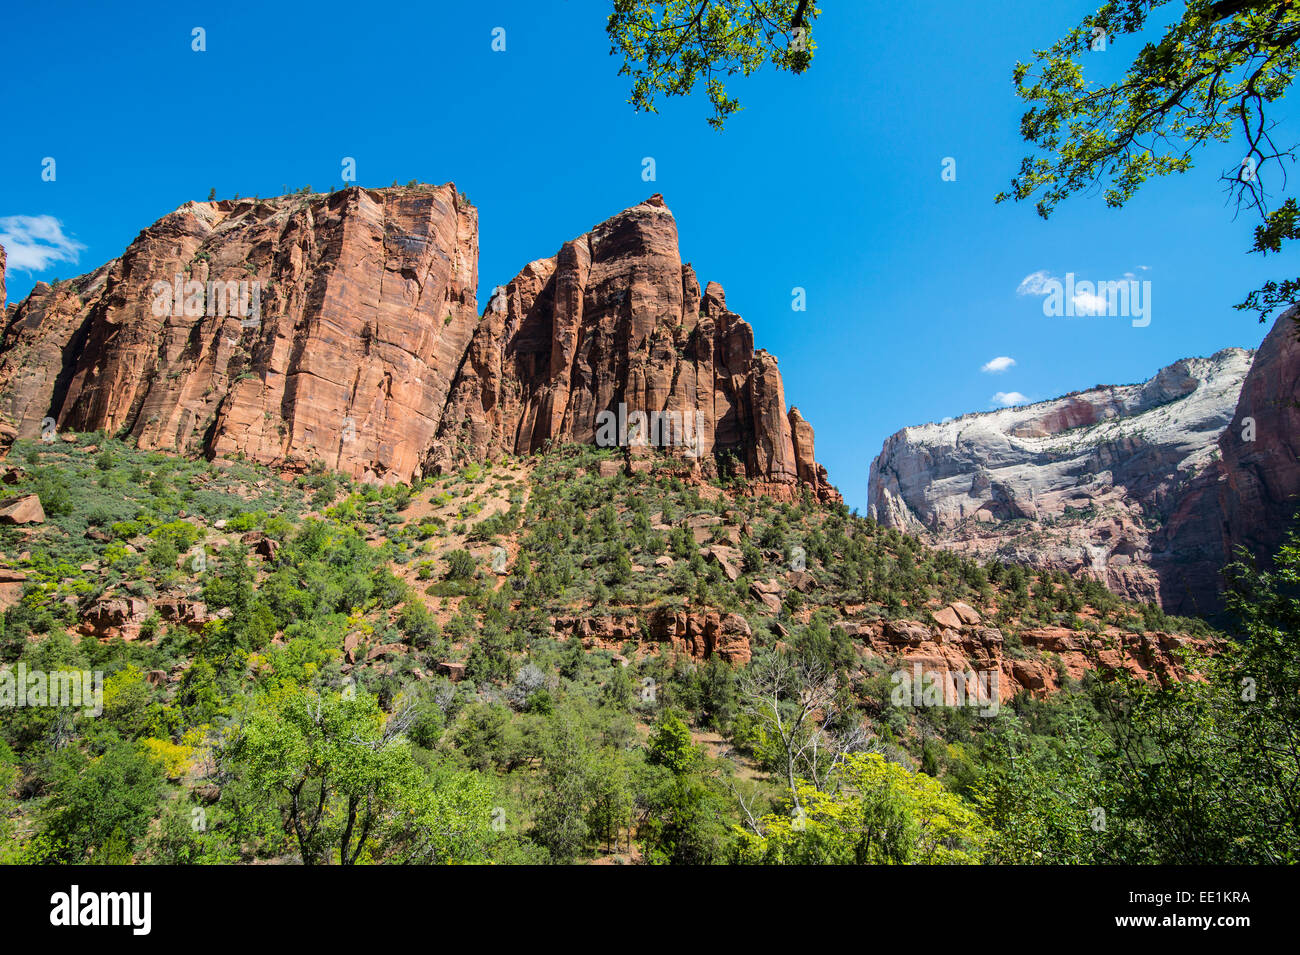 View over the towering cliffs of the Zion National Park, Utah, United States of America, North America Stock Photo